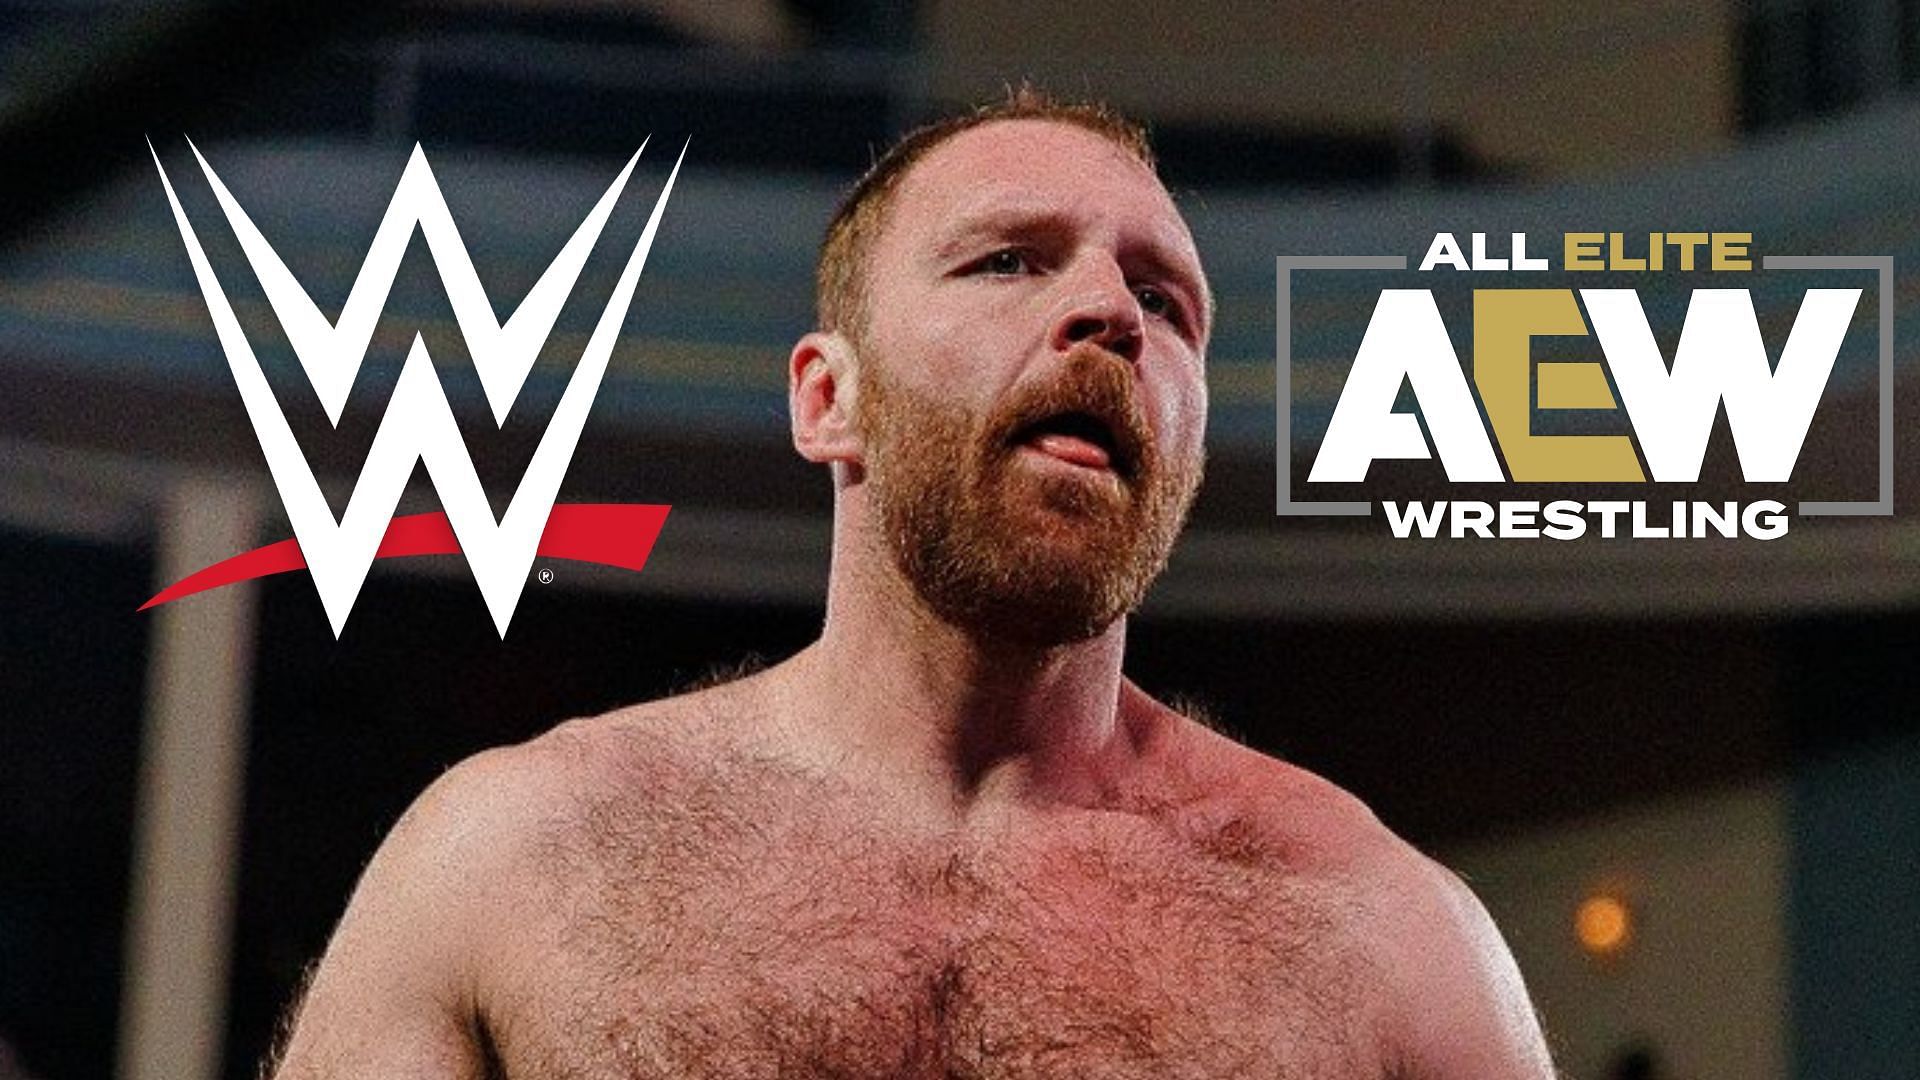 Jon Moxley was briefly a free agent during his time in AEW